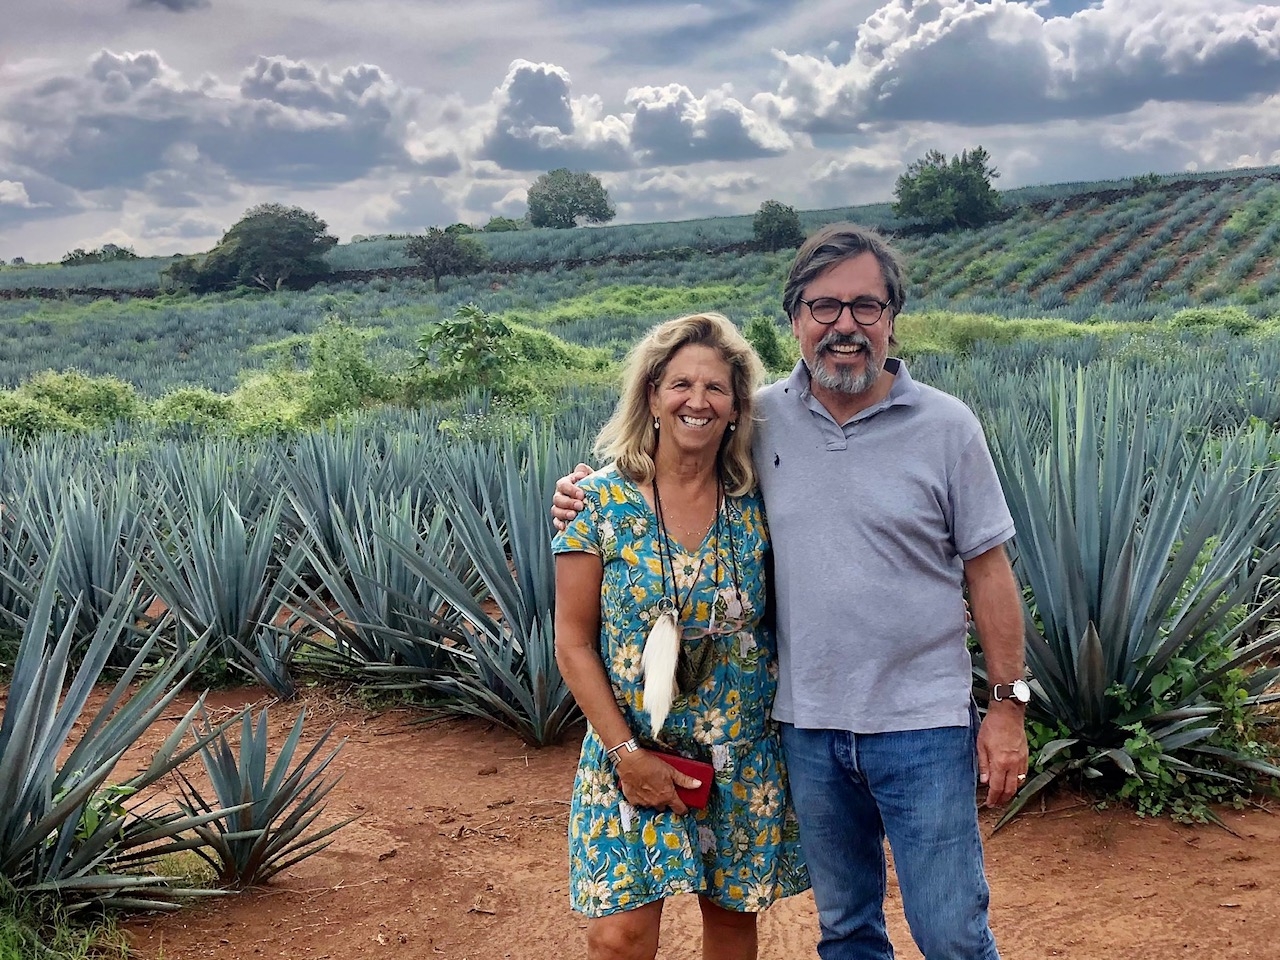 Agave: California's new drought-resistant crop?